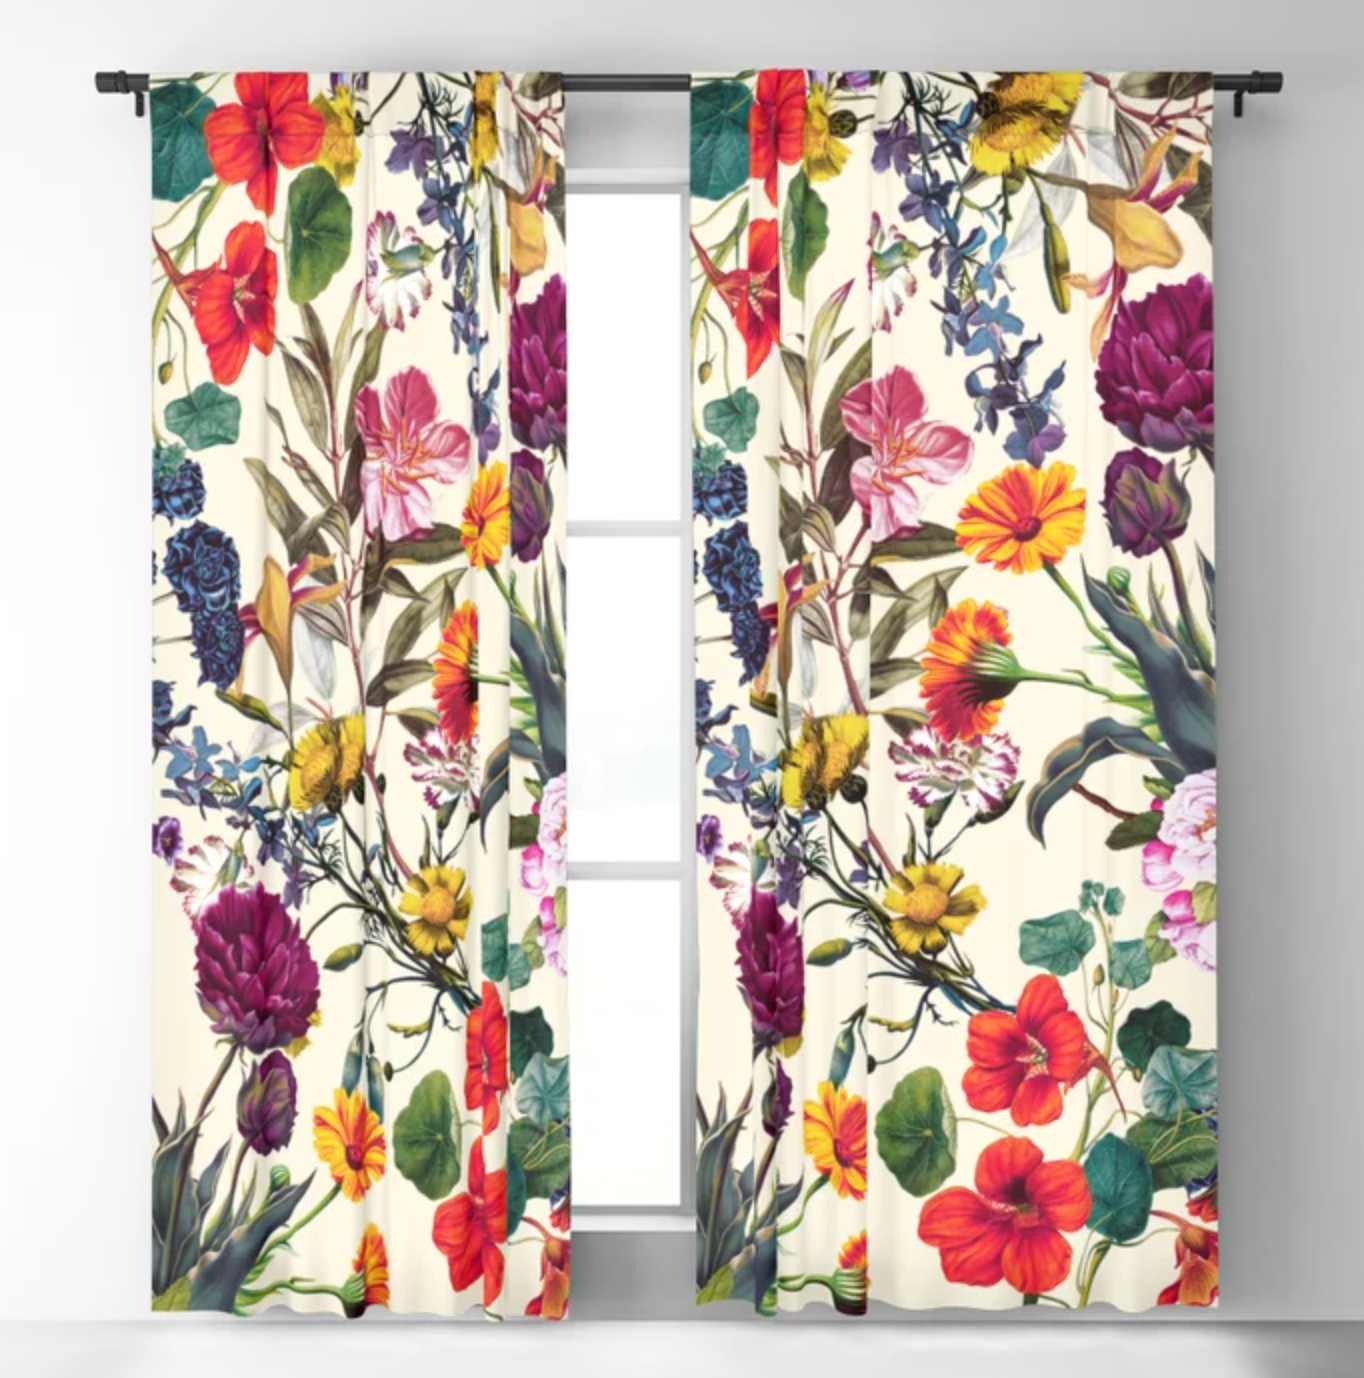 Cream curtains with red, purple, and yellow flowers attached to a window